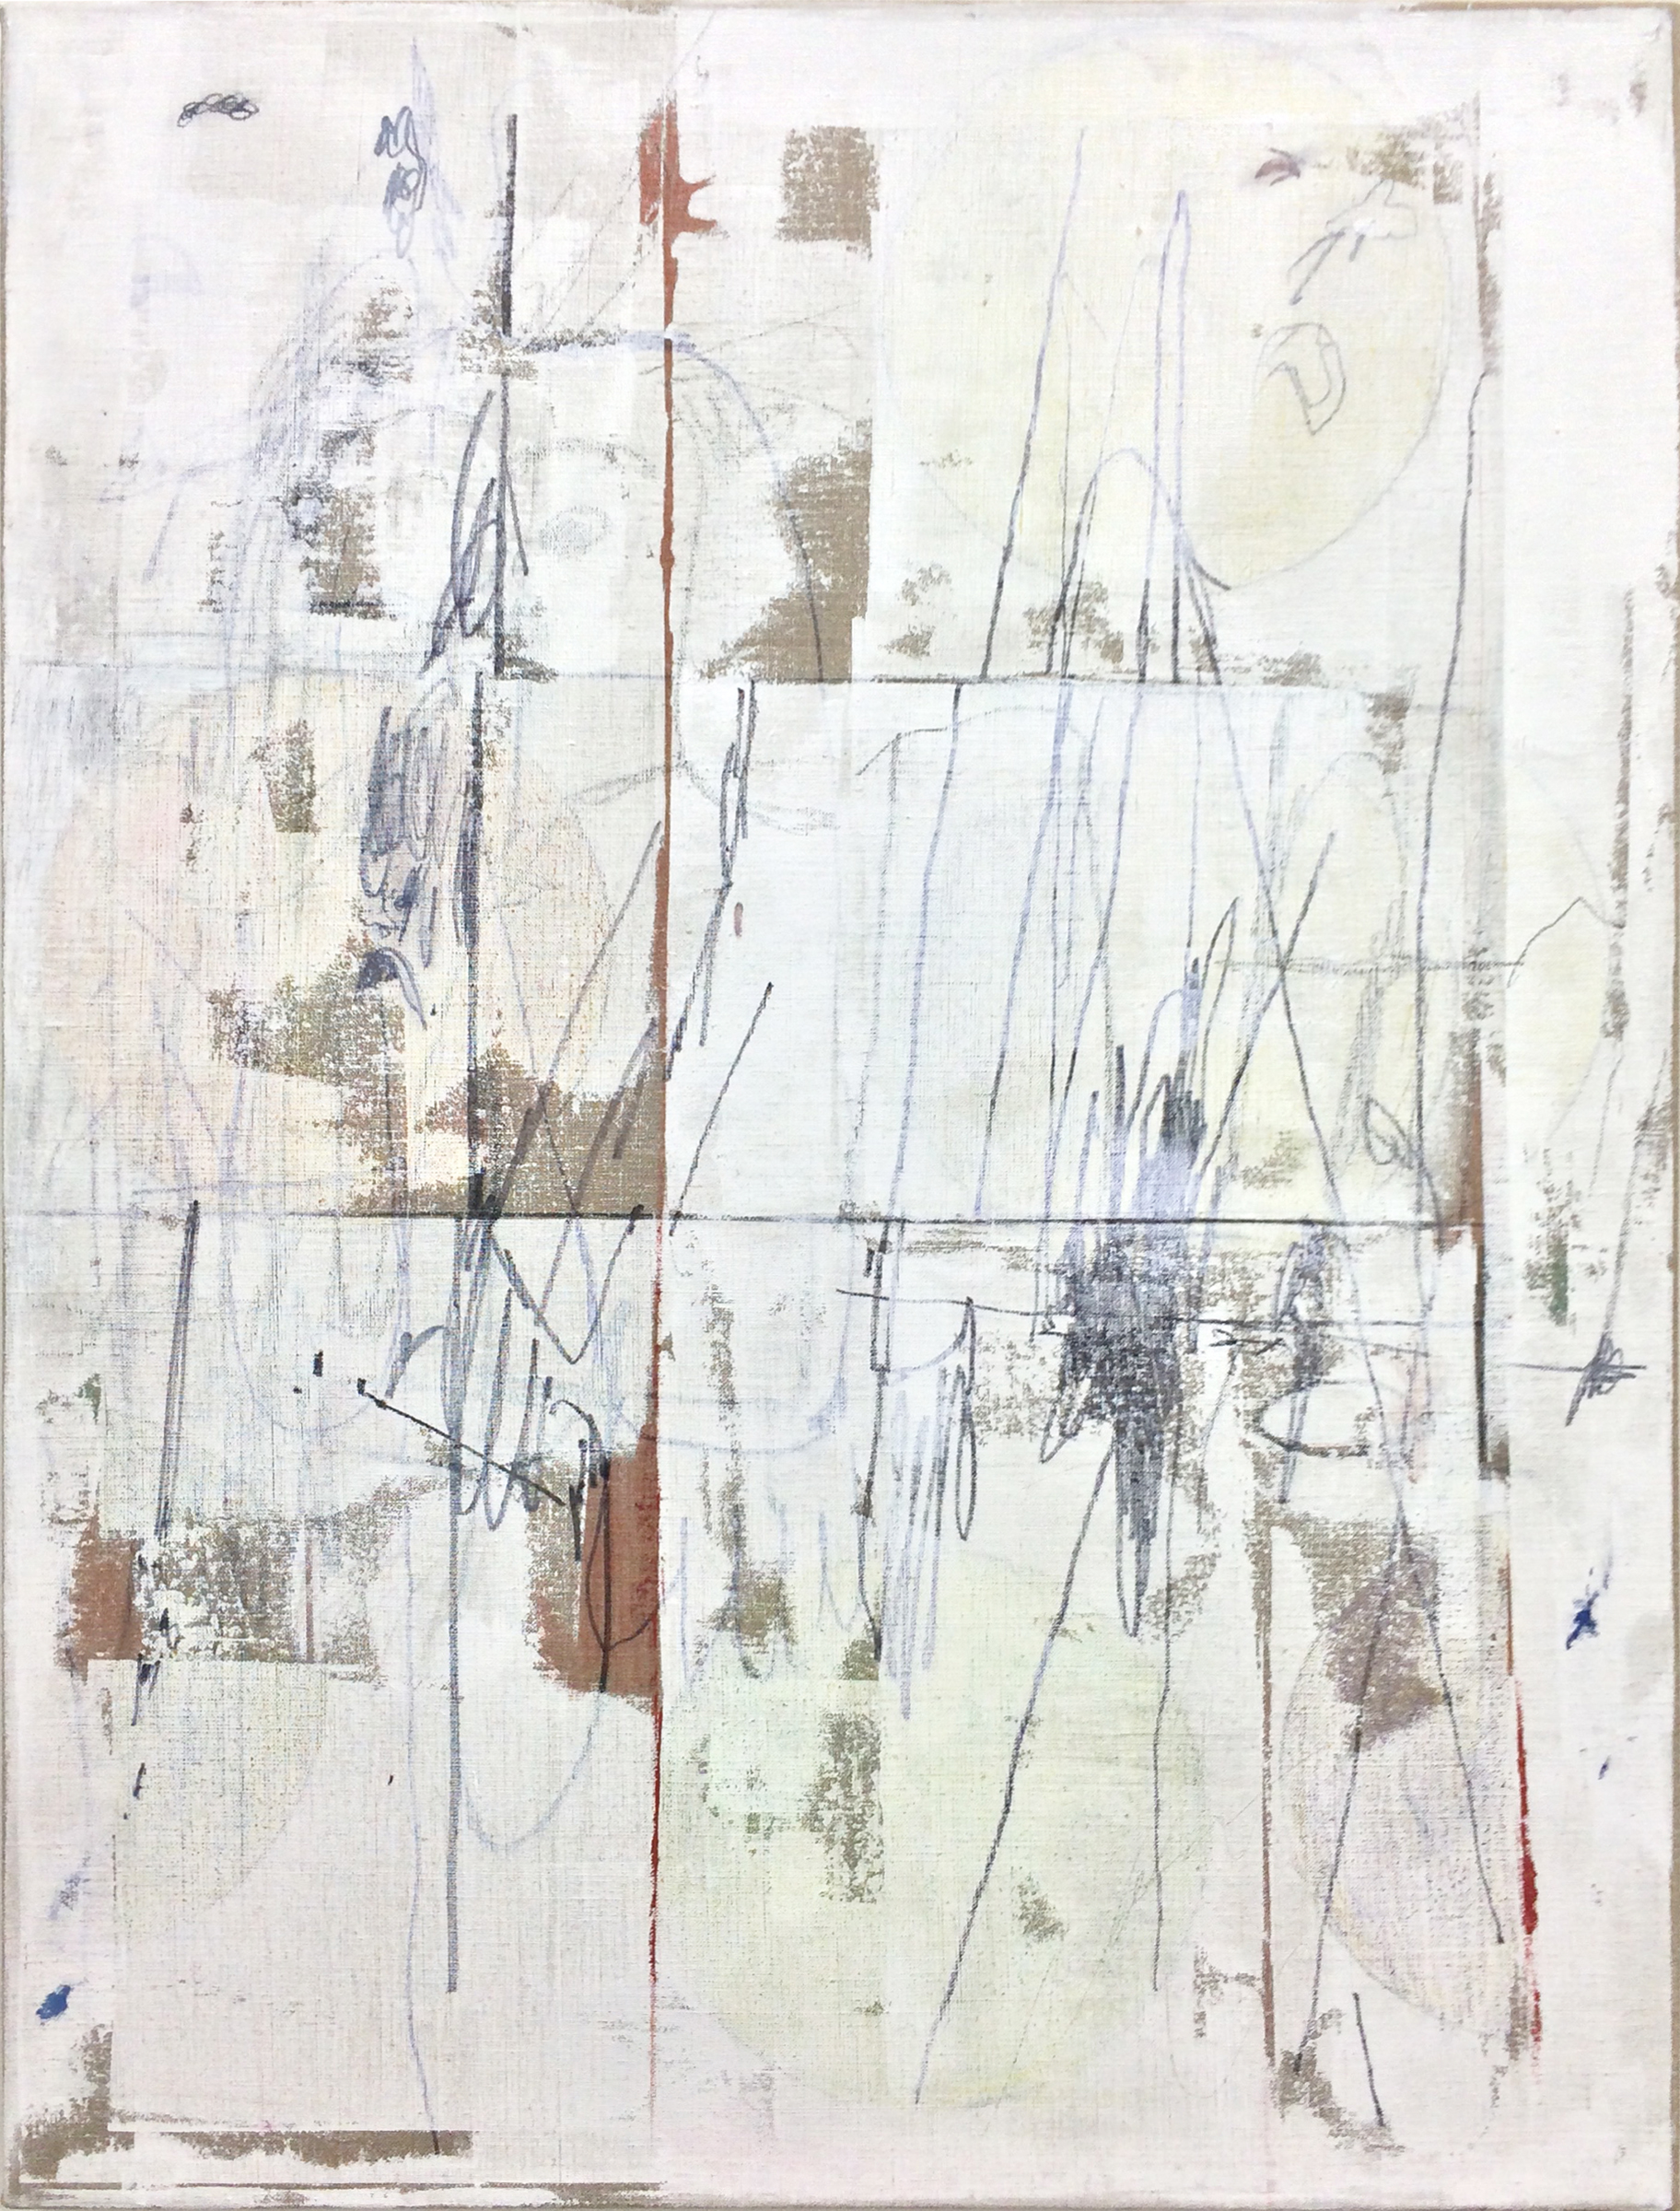   TED GAHL   Commuters (Strangers' Hands Touching, White) , 2015, oil, acrylic, graphite and colord pencil on linen, 48" x 36" 